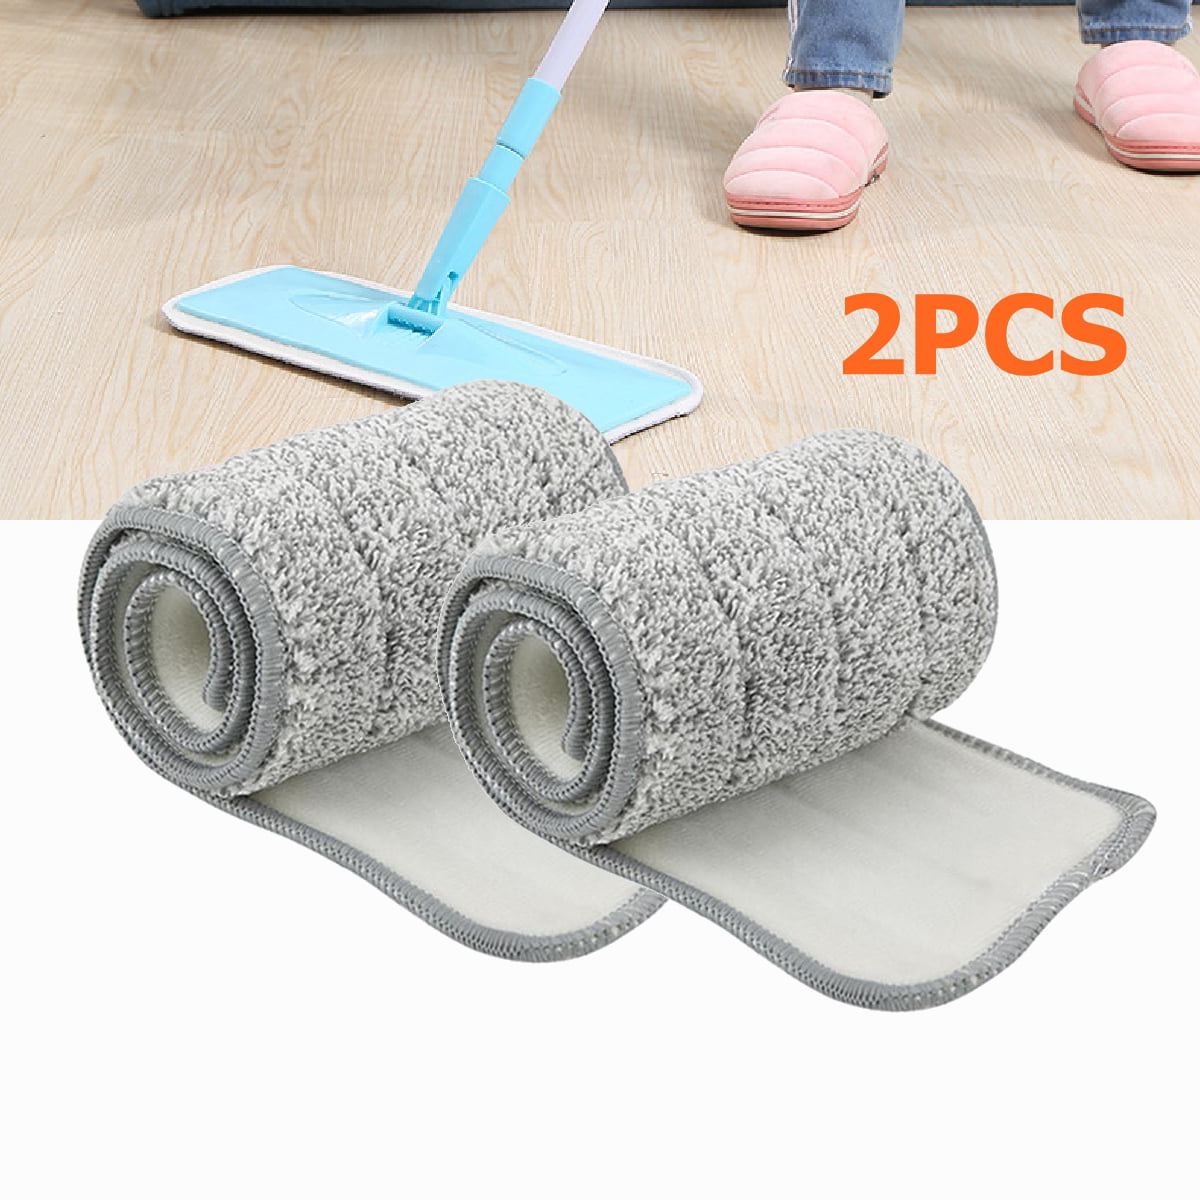 Dust Cleaning Pad Washable Cloth Pad Home Microfiber Mop Heads Replacement Cloth 